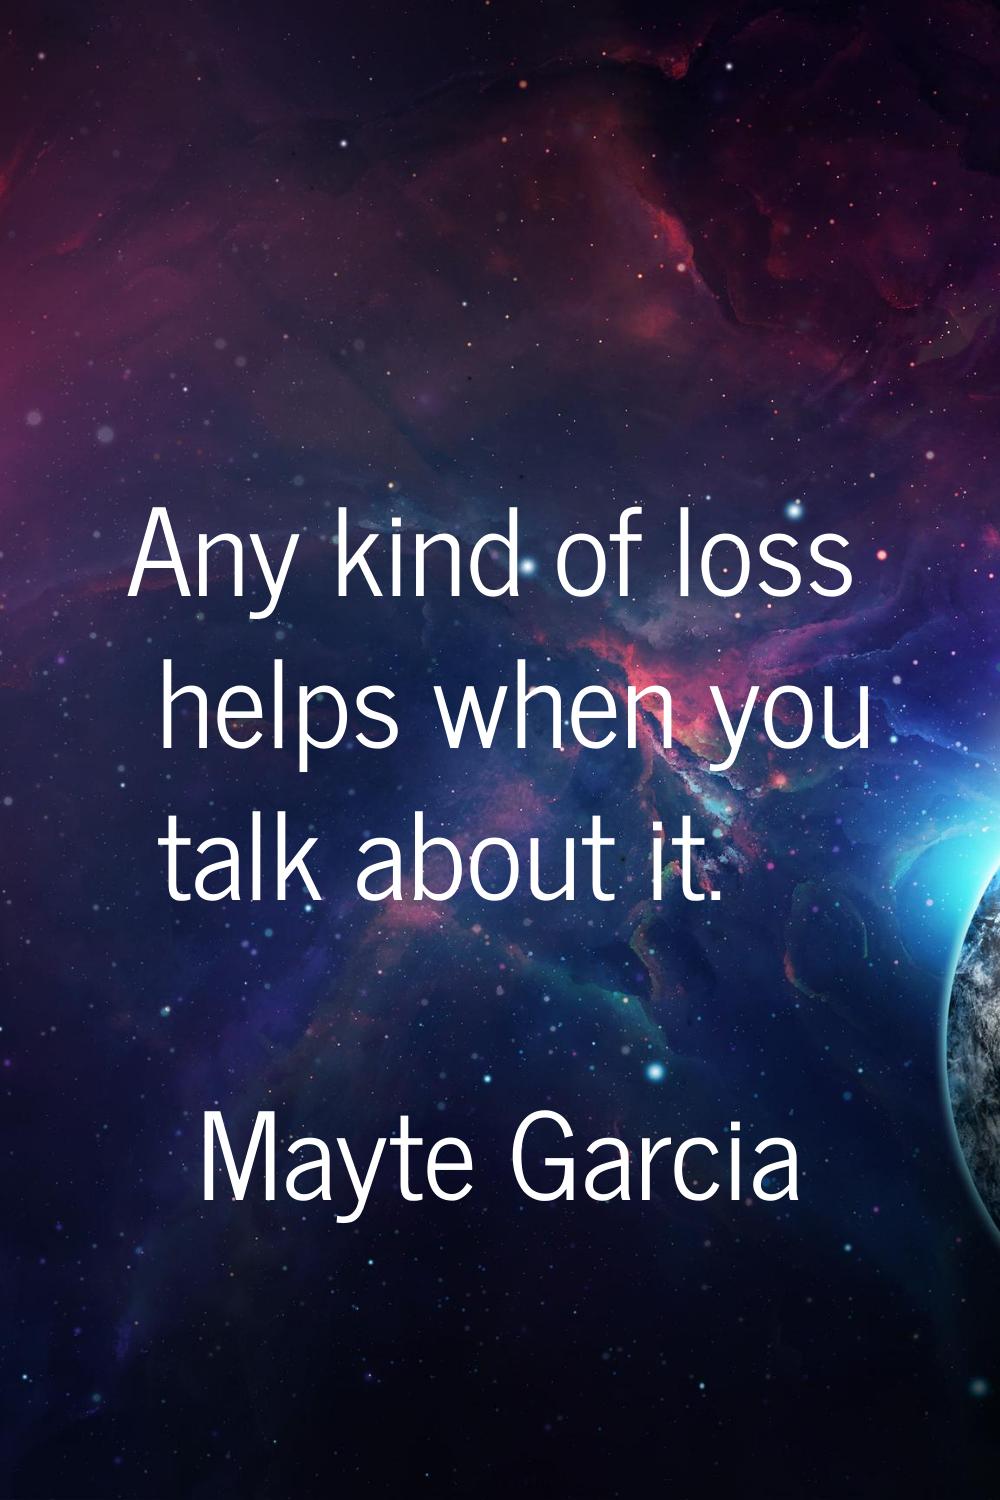 Any kind of loss helps when you talk about it.